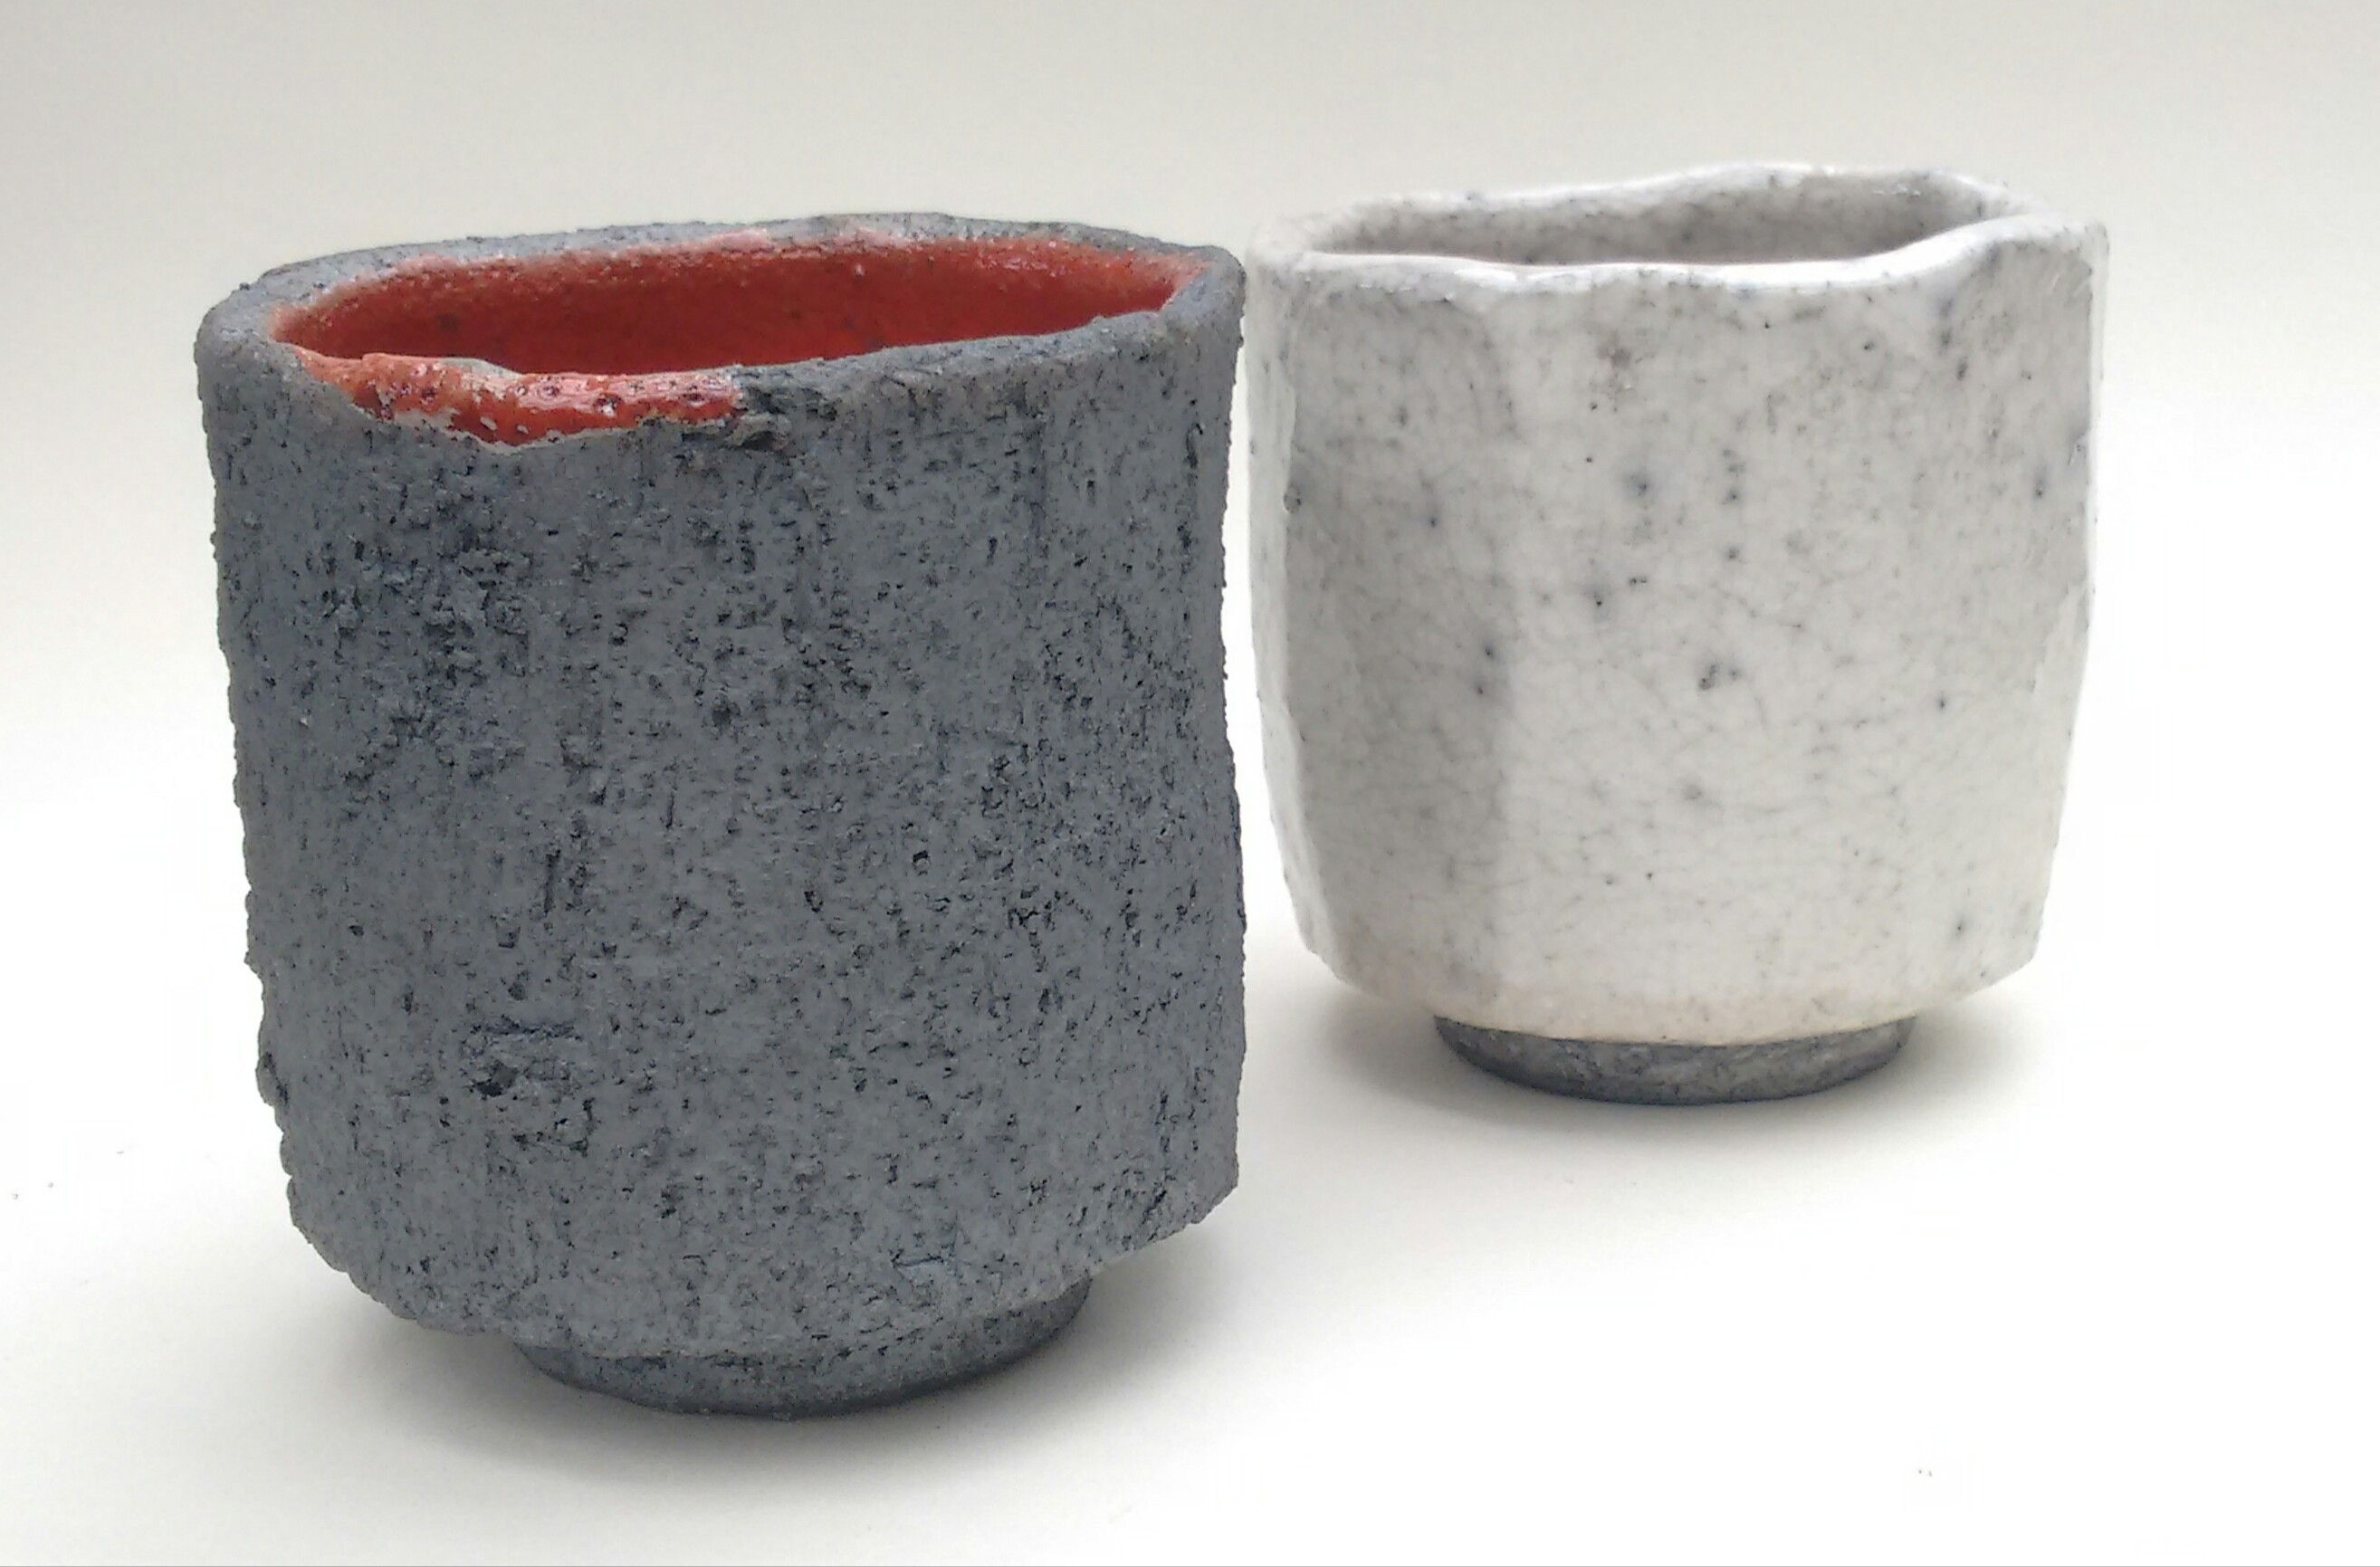 An image of two small pots, one in dark speckled grey and one in light 